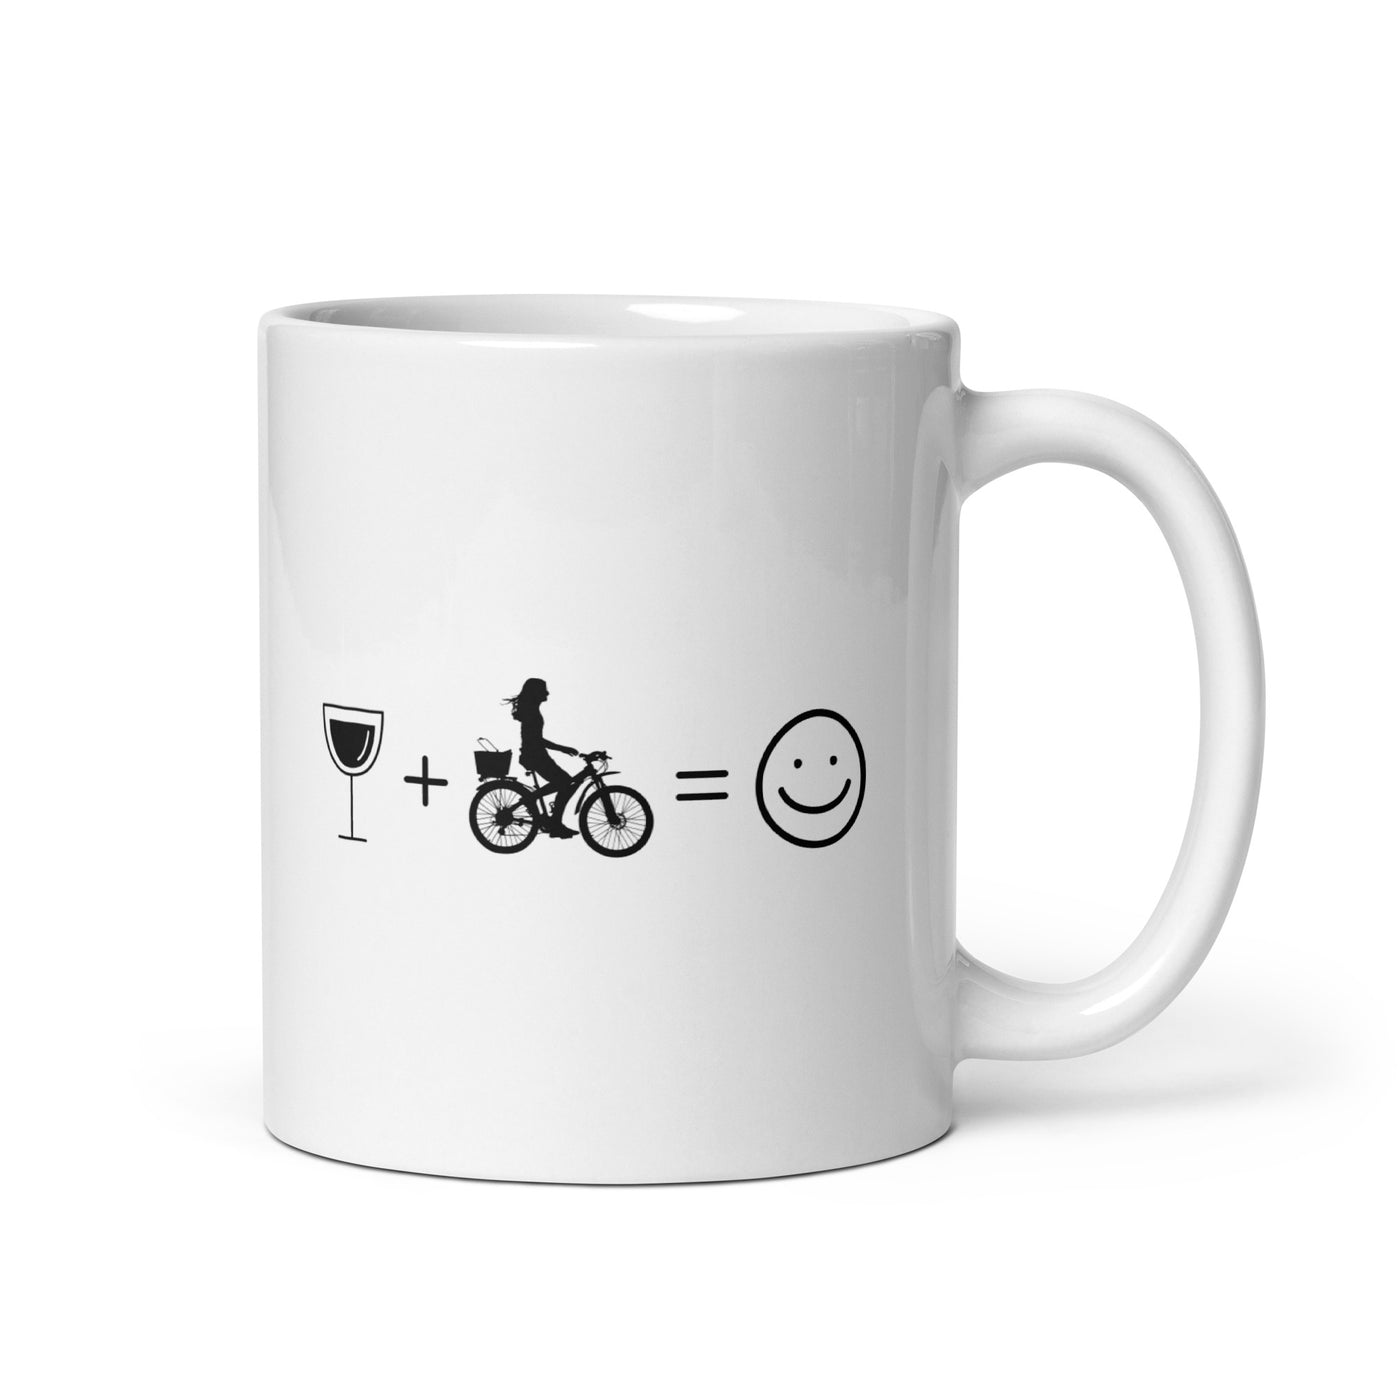 Wine Smile Face And Cycling 2 - Tasse fahrrad